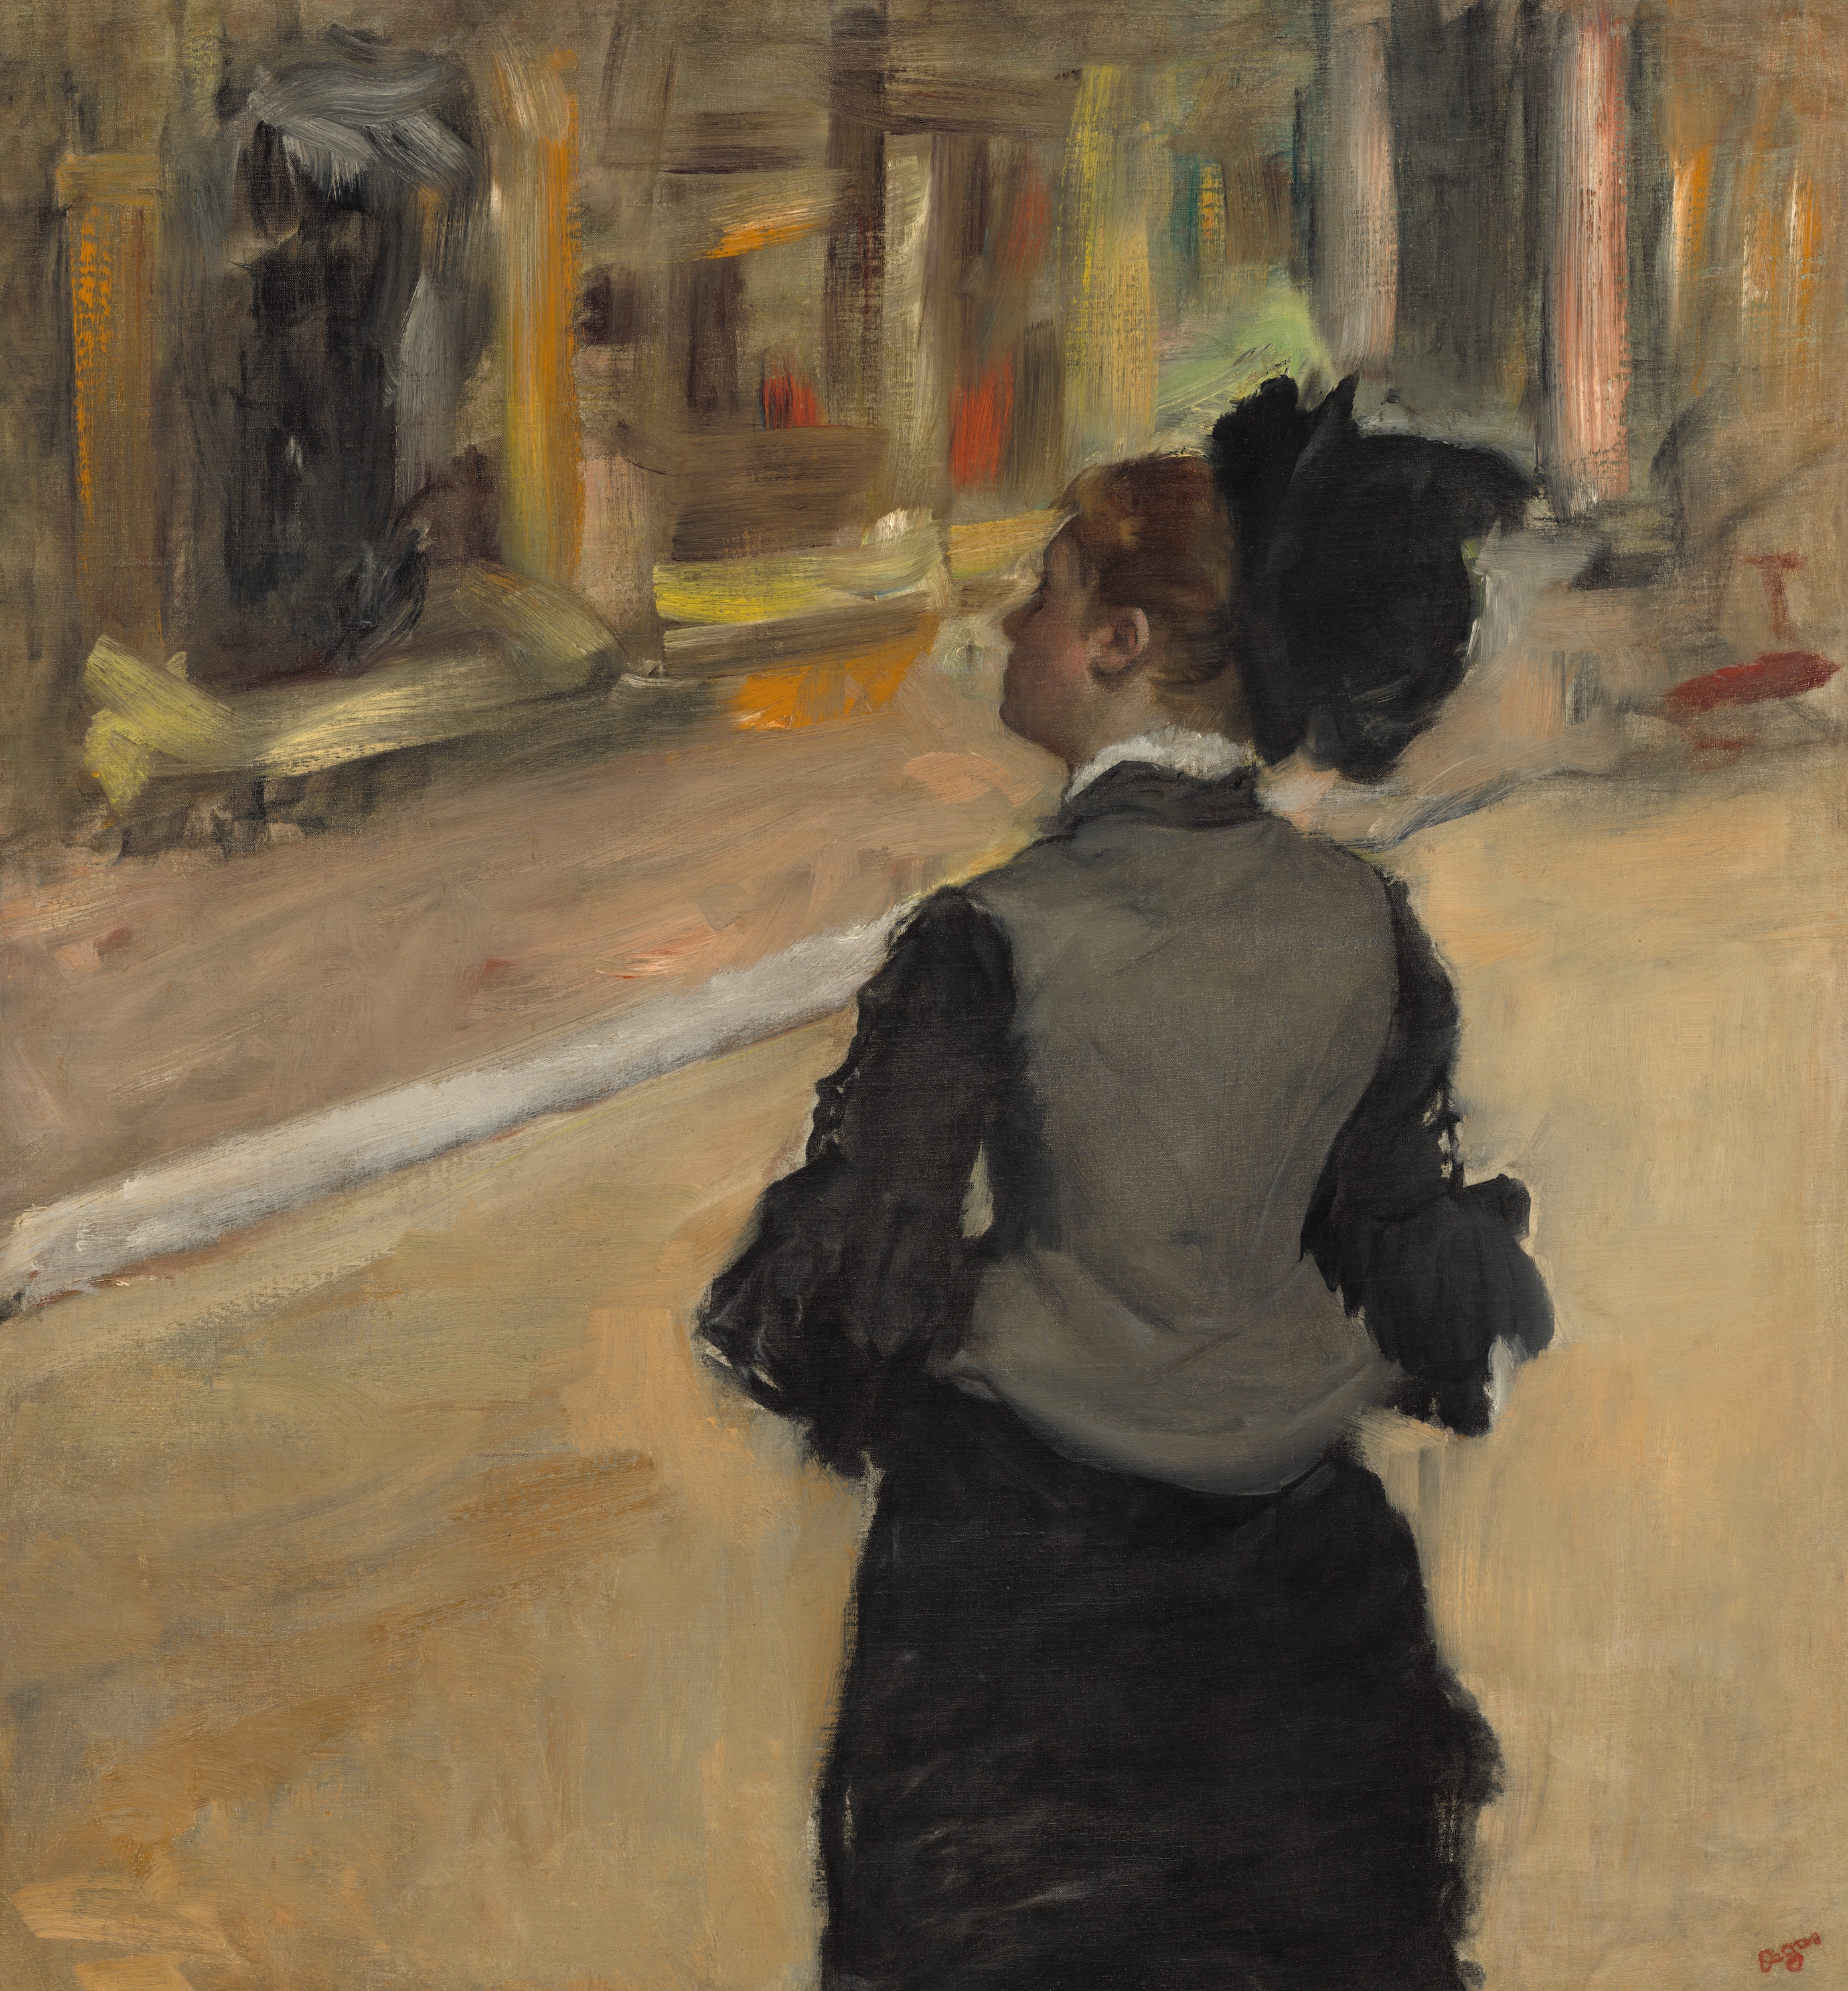 Woman Viewed from Behind (Visit to a Museum) by Edgar Degas - between circa 1879 and circa 1885 - 81.3 × 75.6 cm National Gallery of Art